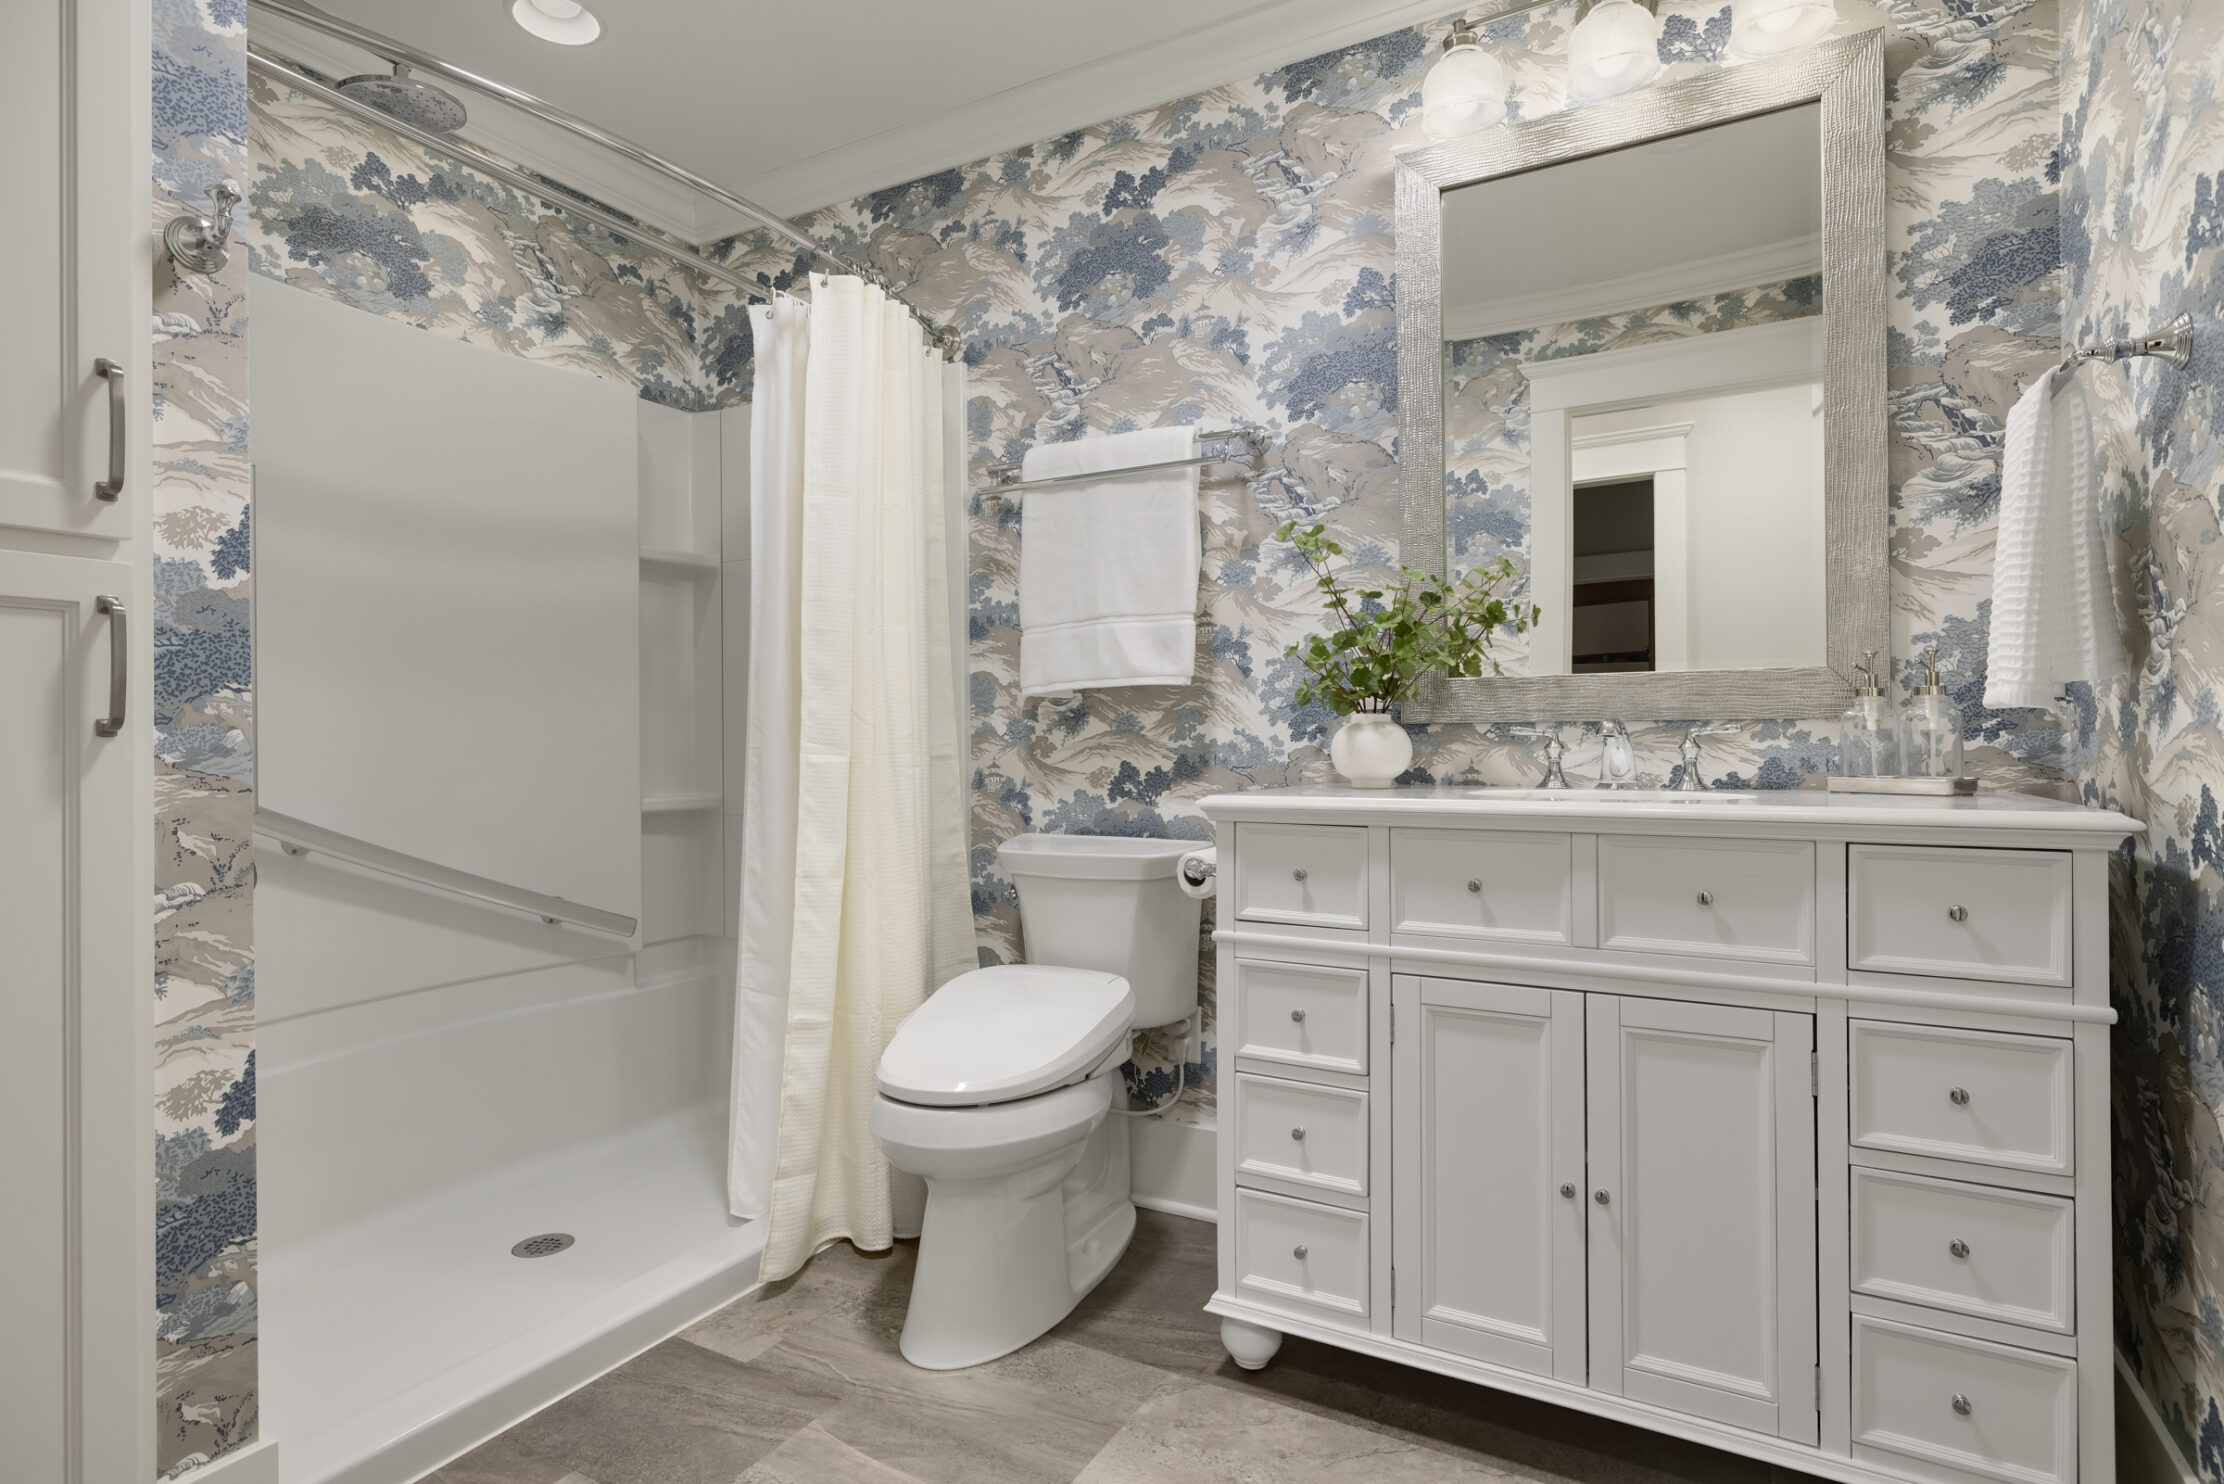 High end, luxury bathroom remodel from James Barton Design Build in Minneapolis